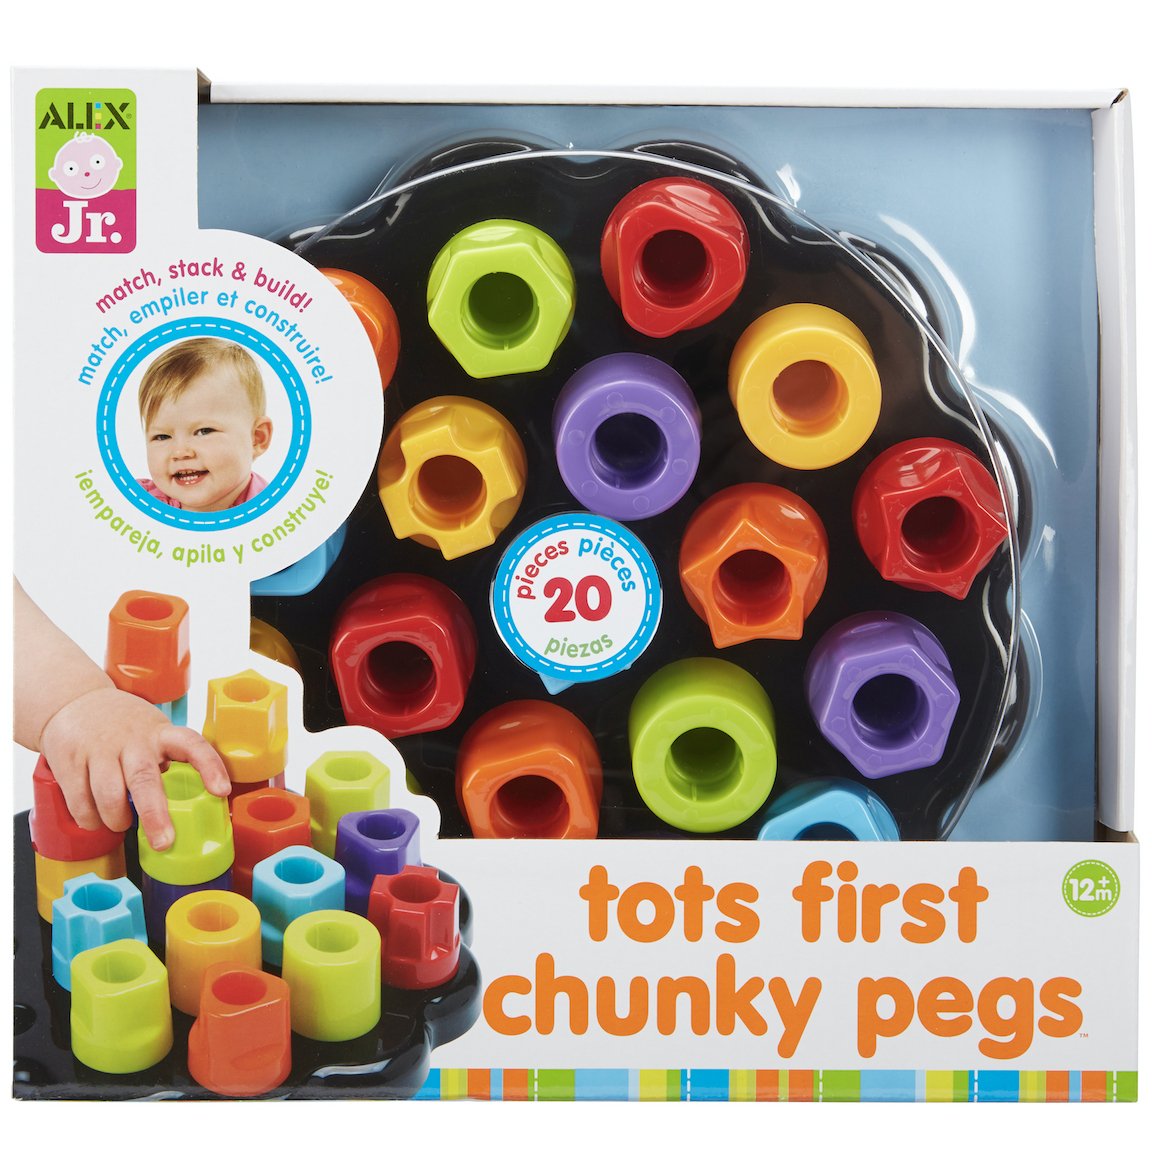 alex-brands-tots-first-chunky-pegs- (2)